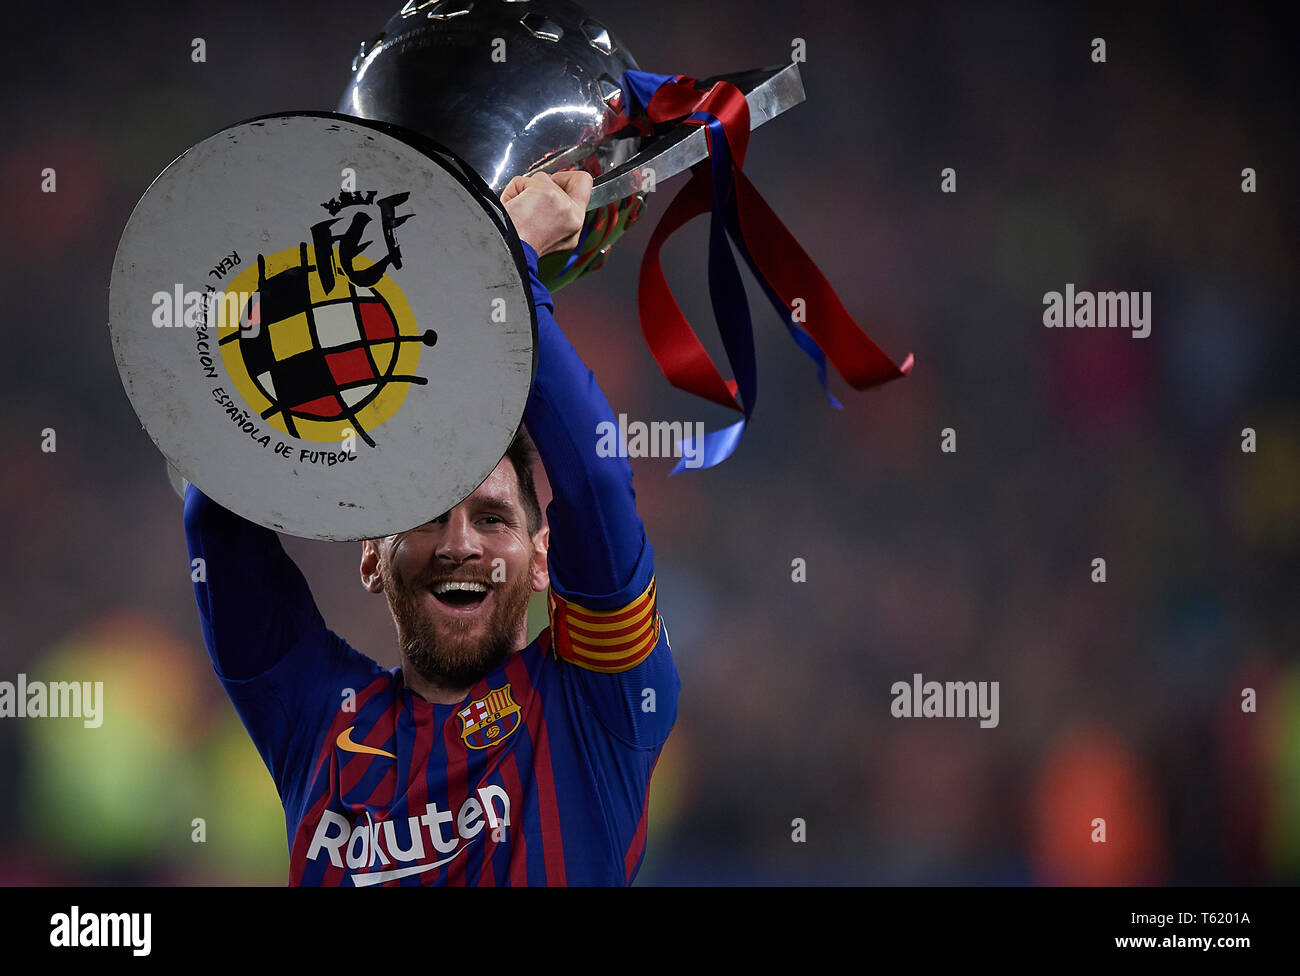 La liga trophy hi-res stock photography and images - Alamy